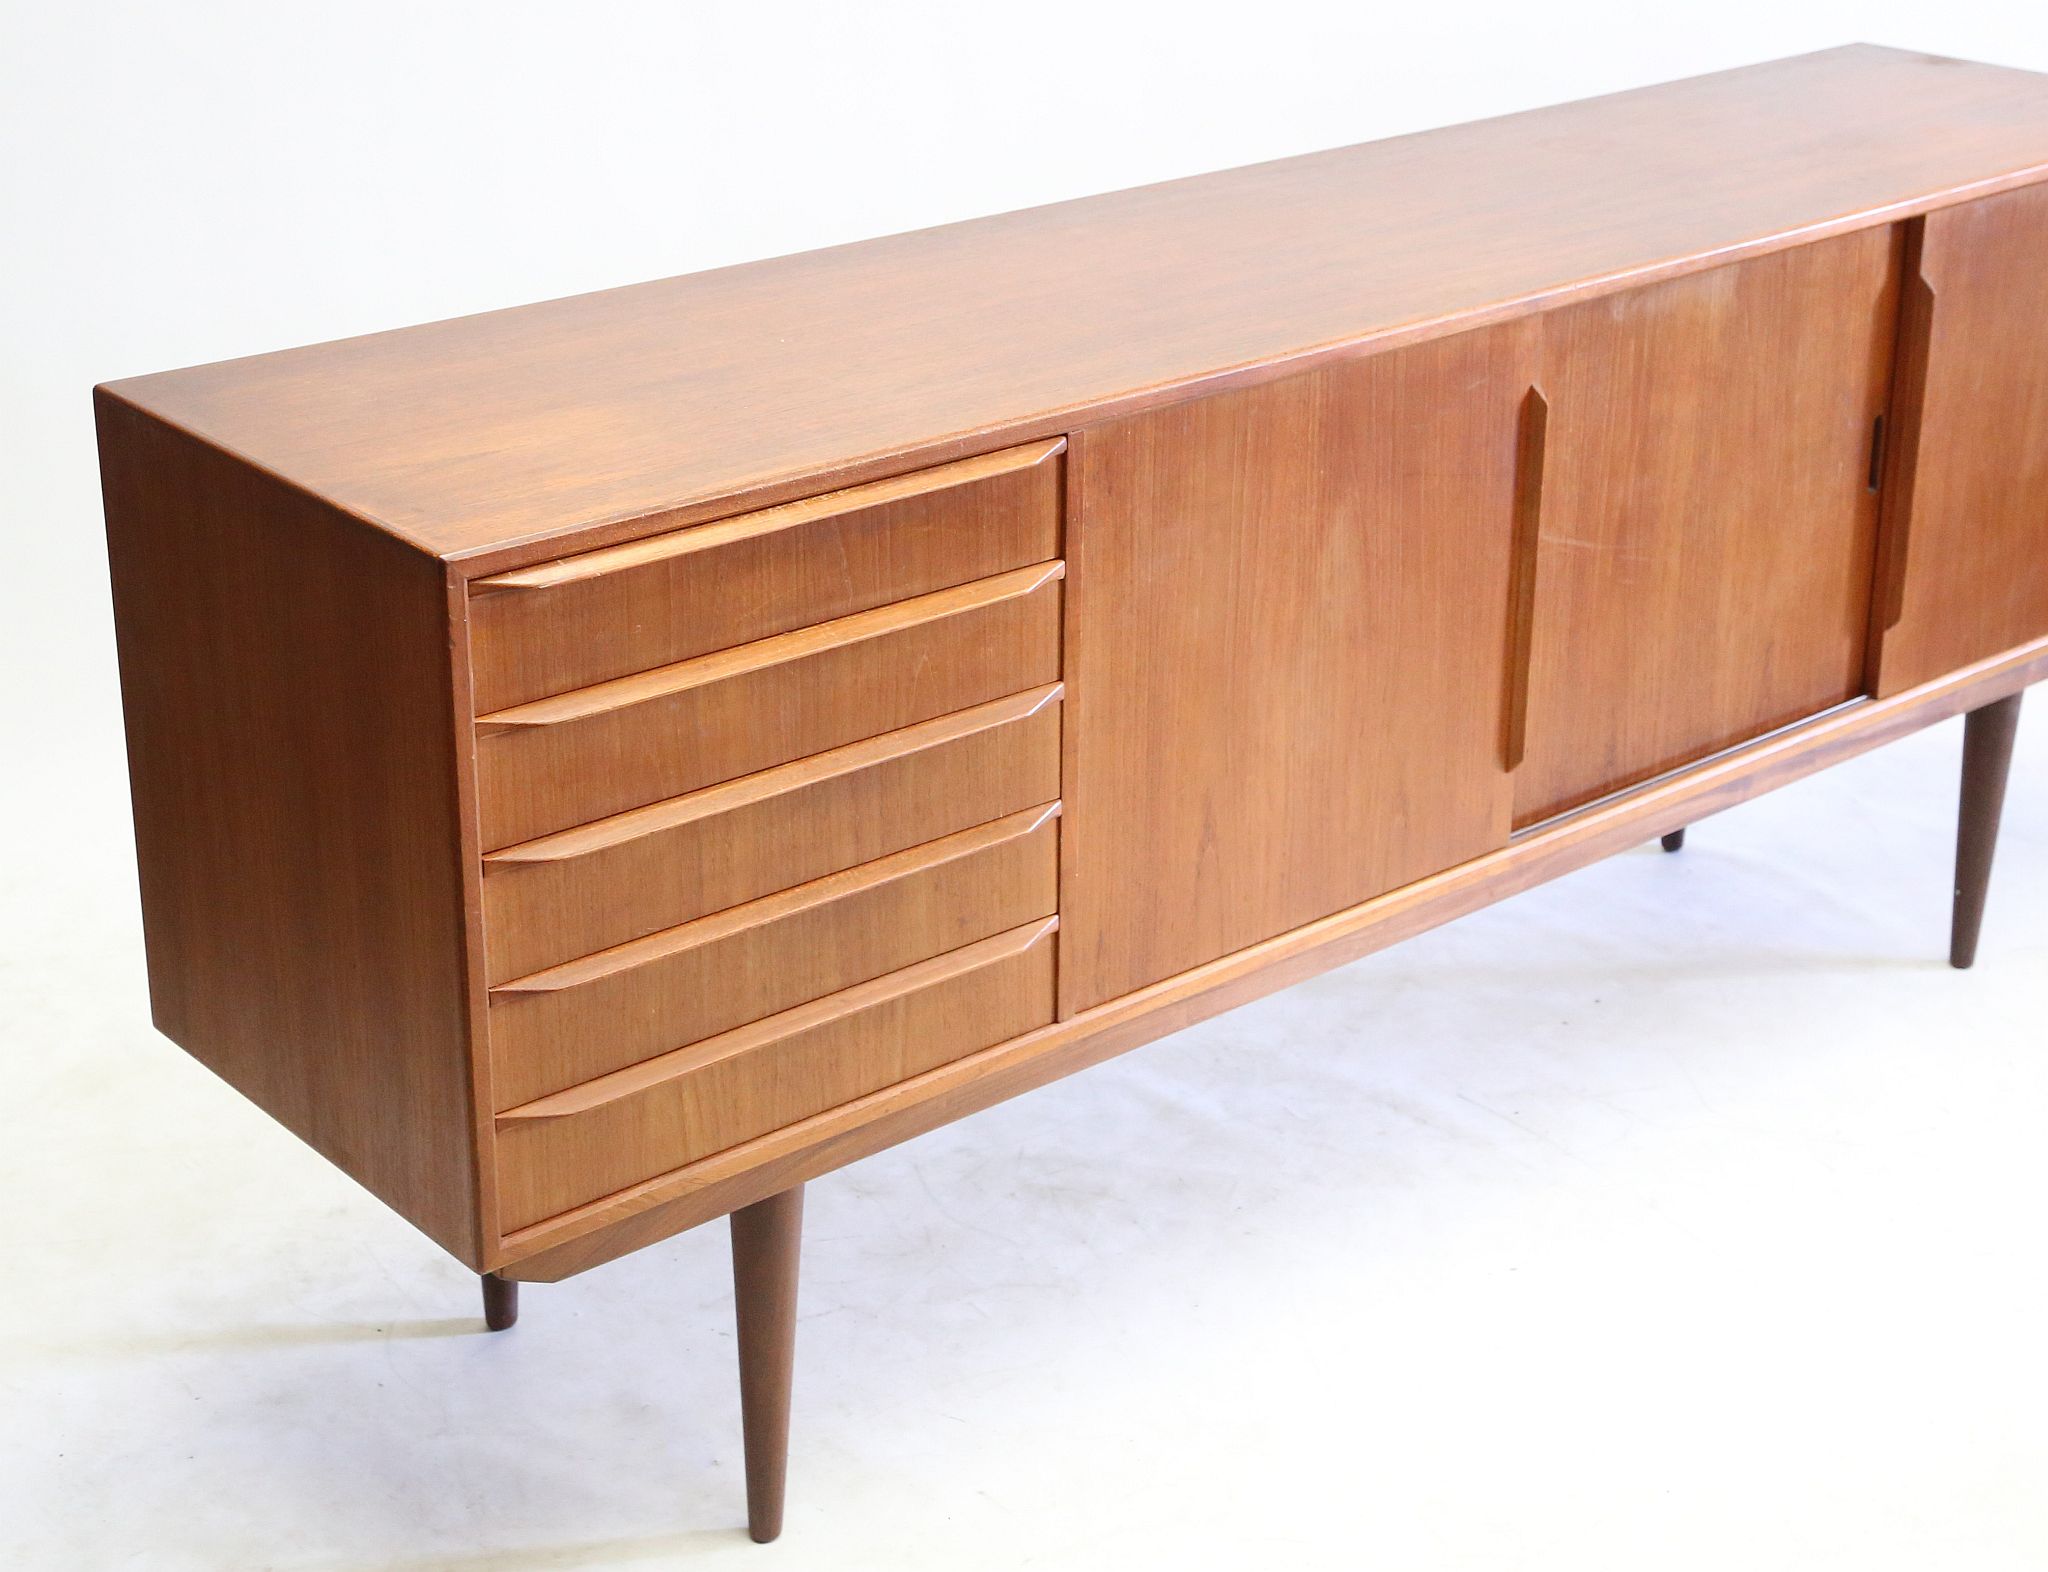 A DANISH 1960s TEAK SIDEBOARD, attributed to Svend - Image 7 of 10